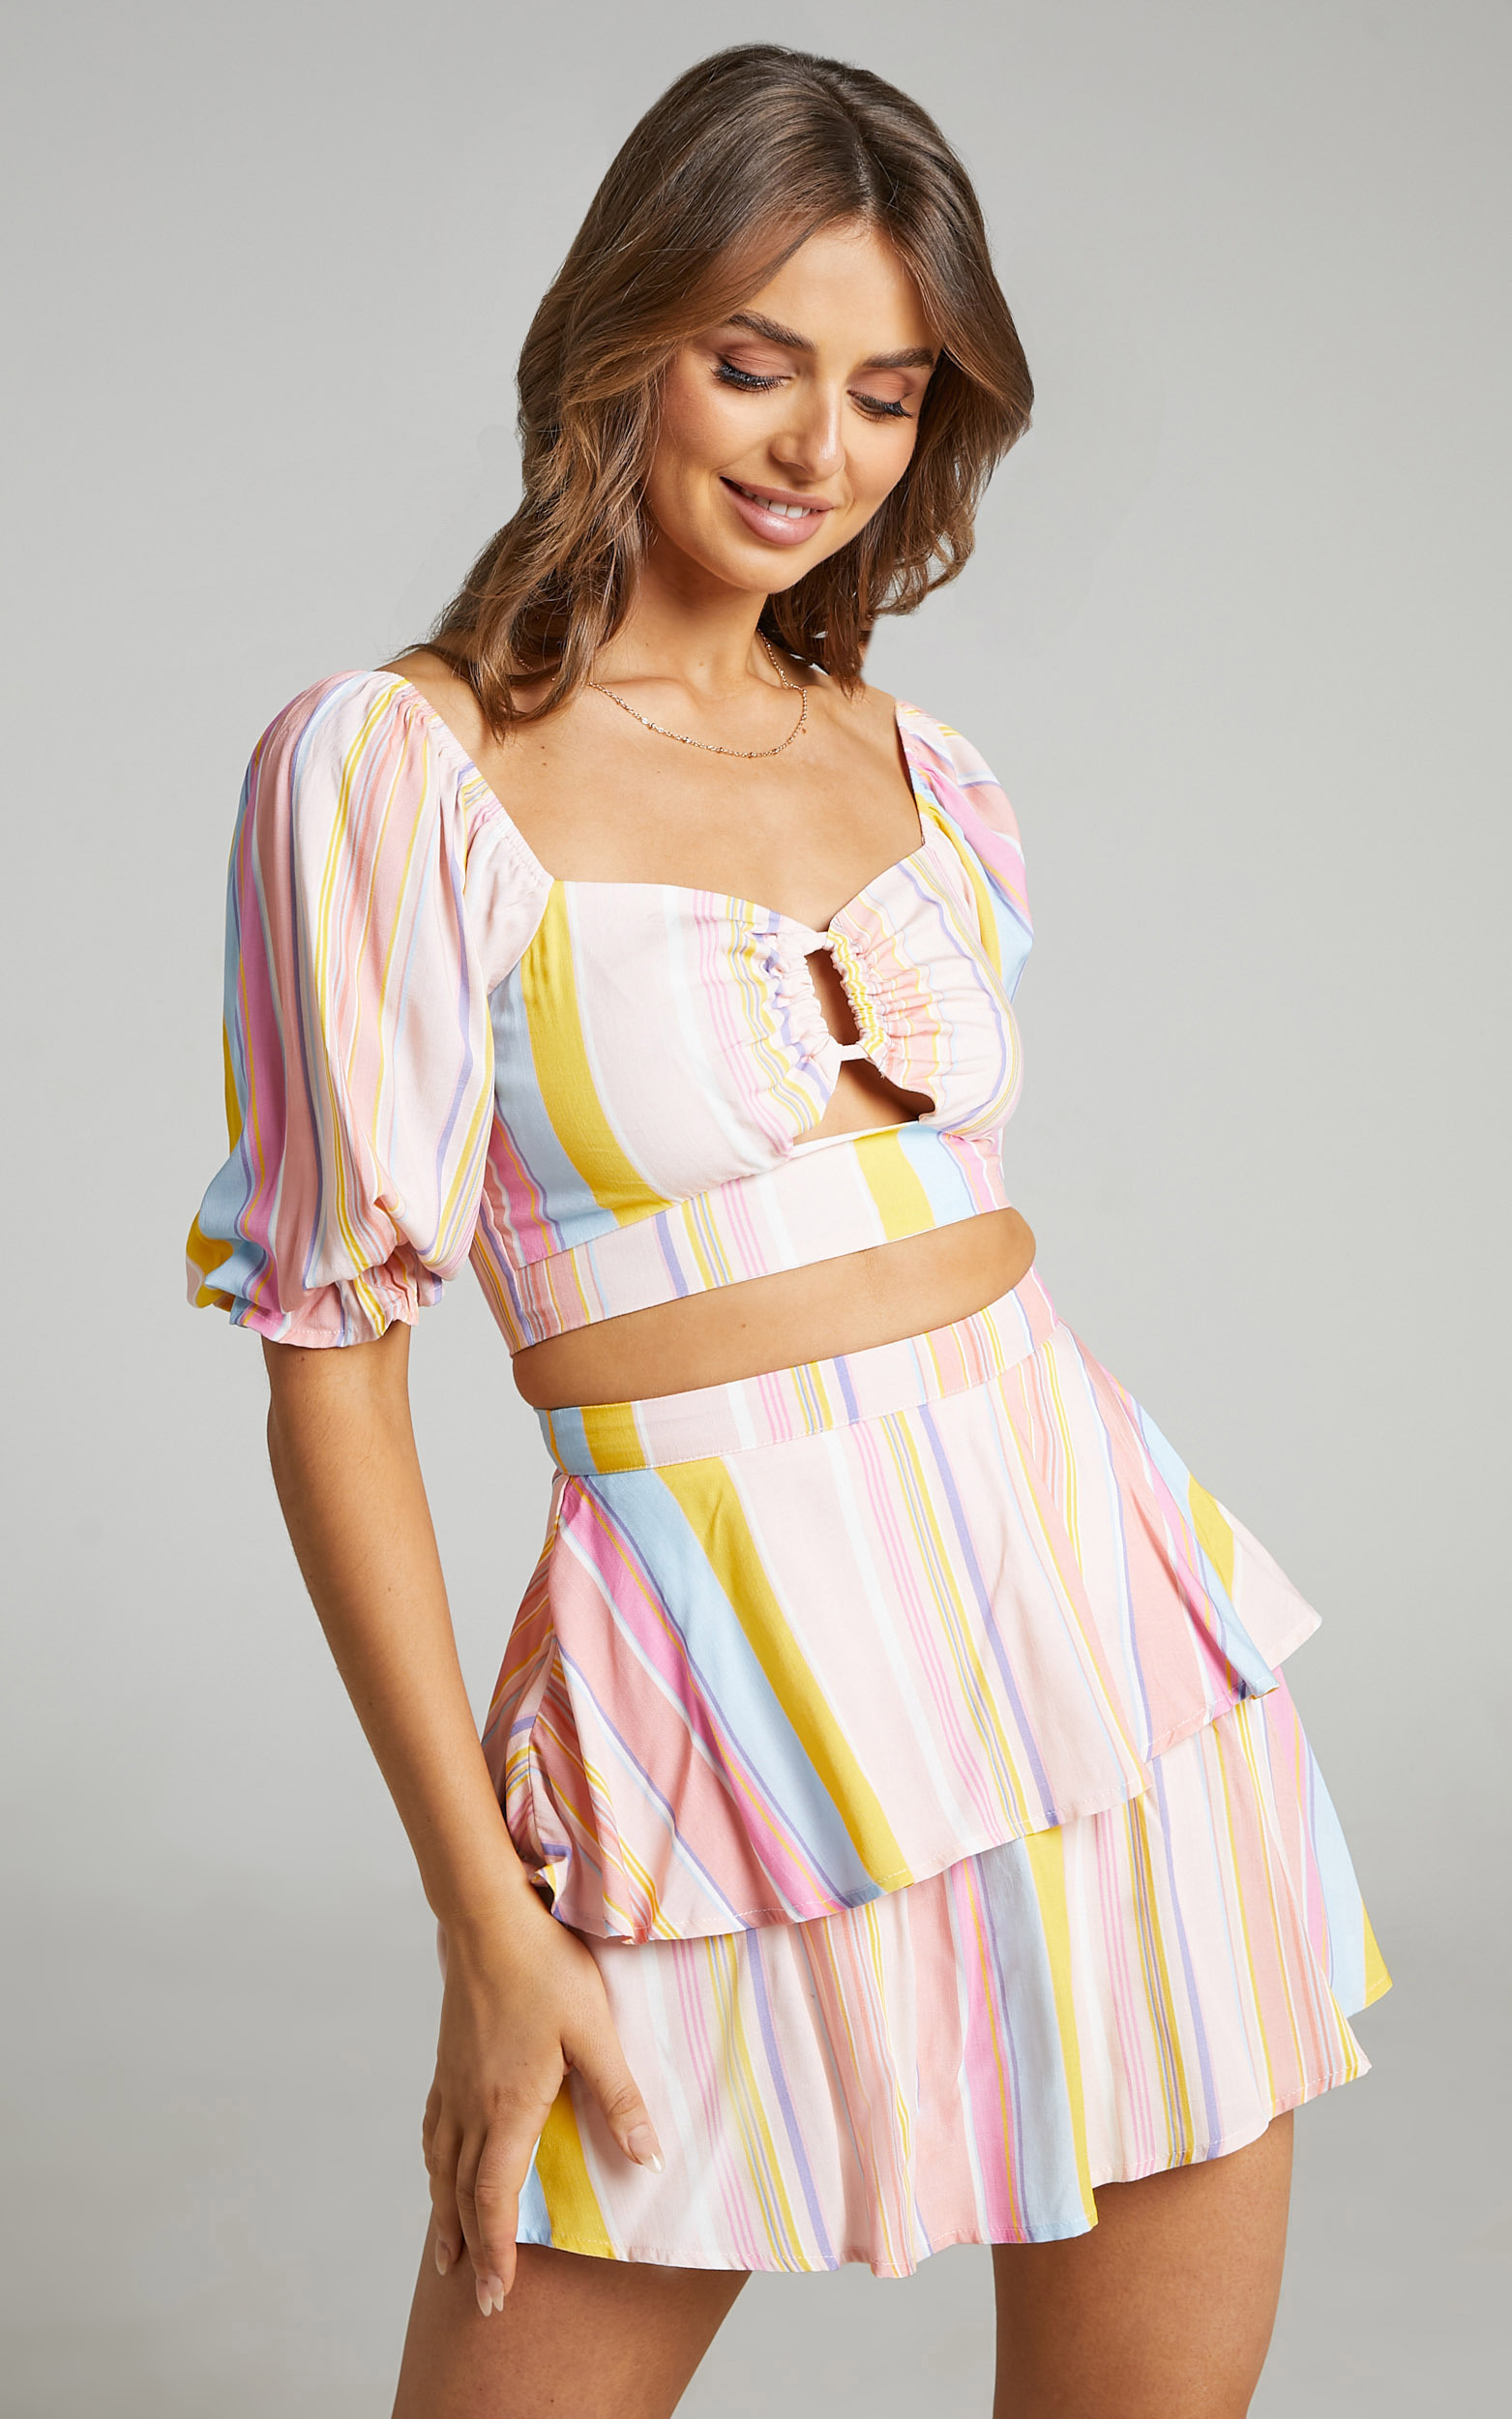 Khaia Puff Sleeve Keyhole Crop Top in Summer Multi Stripe - 06, PNK1, hi-res image number null